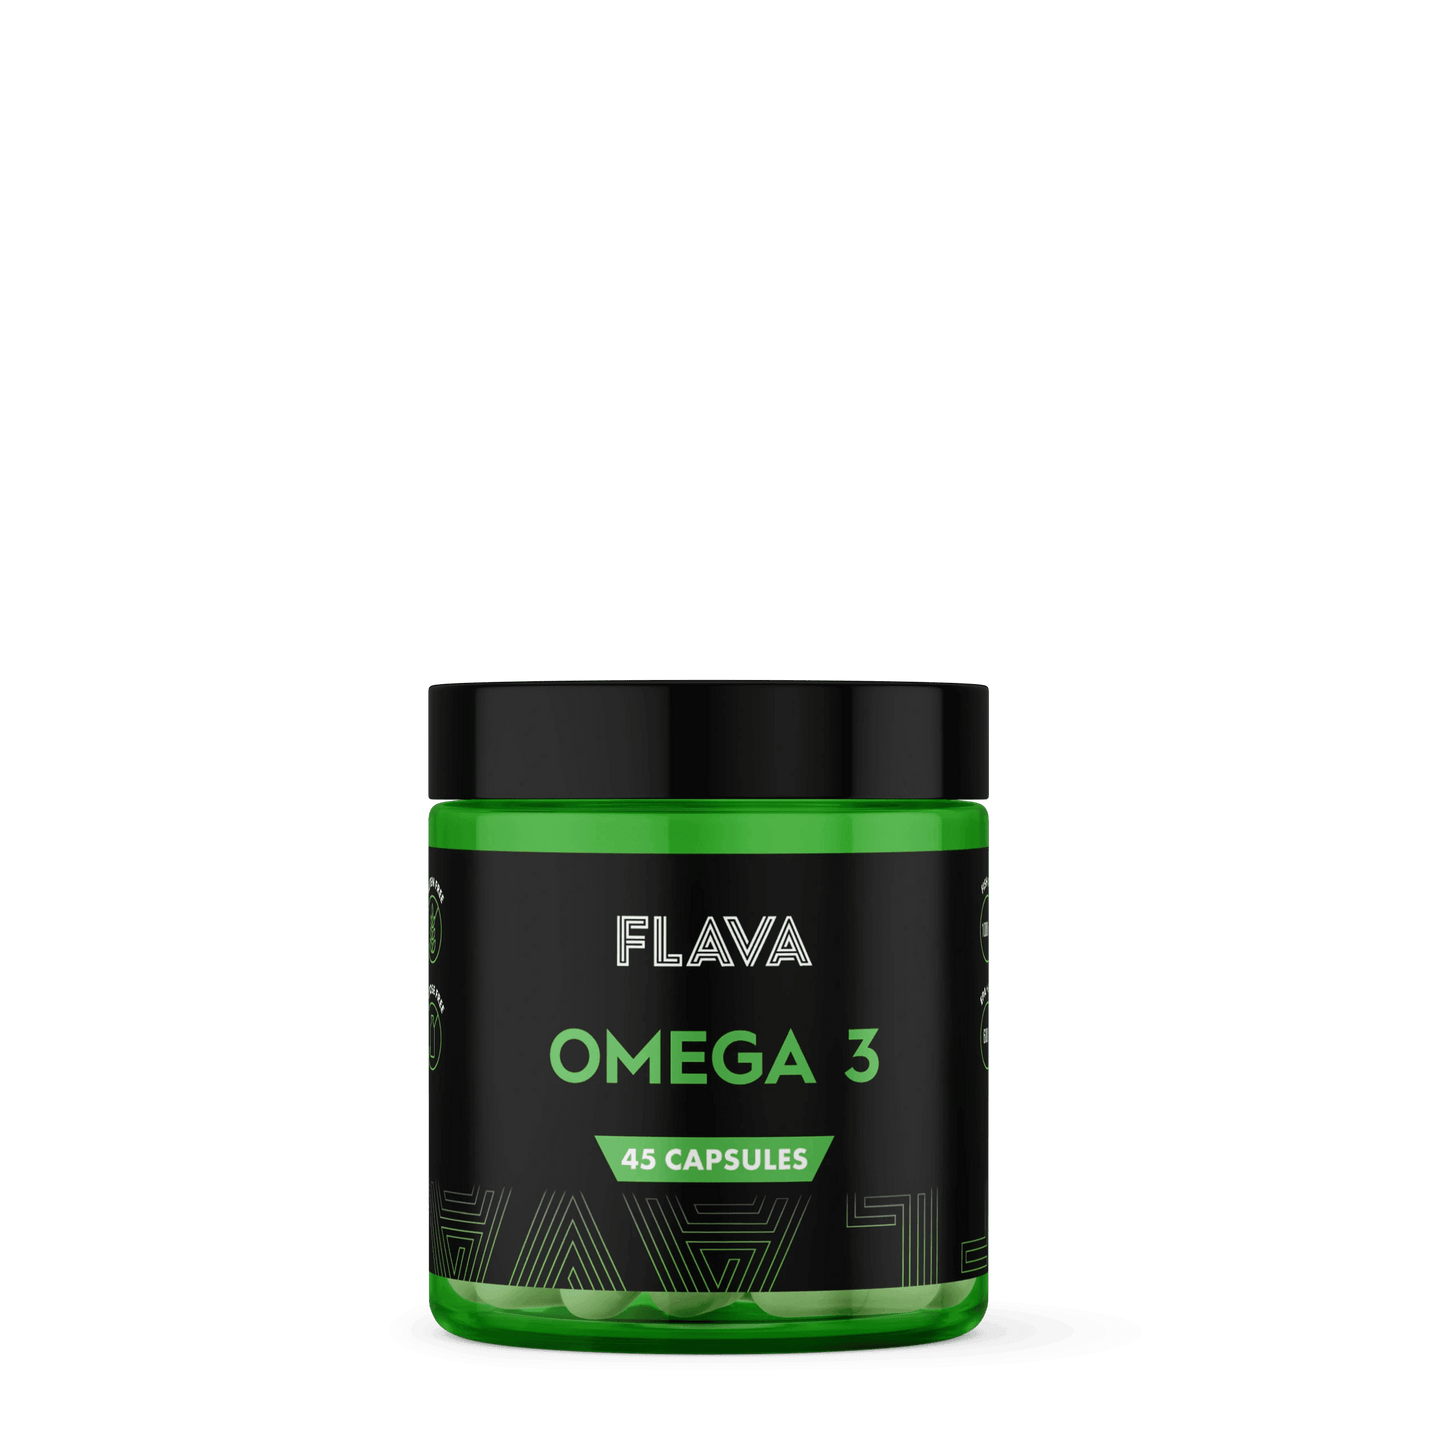 Omega 3 - The Supplements Factory